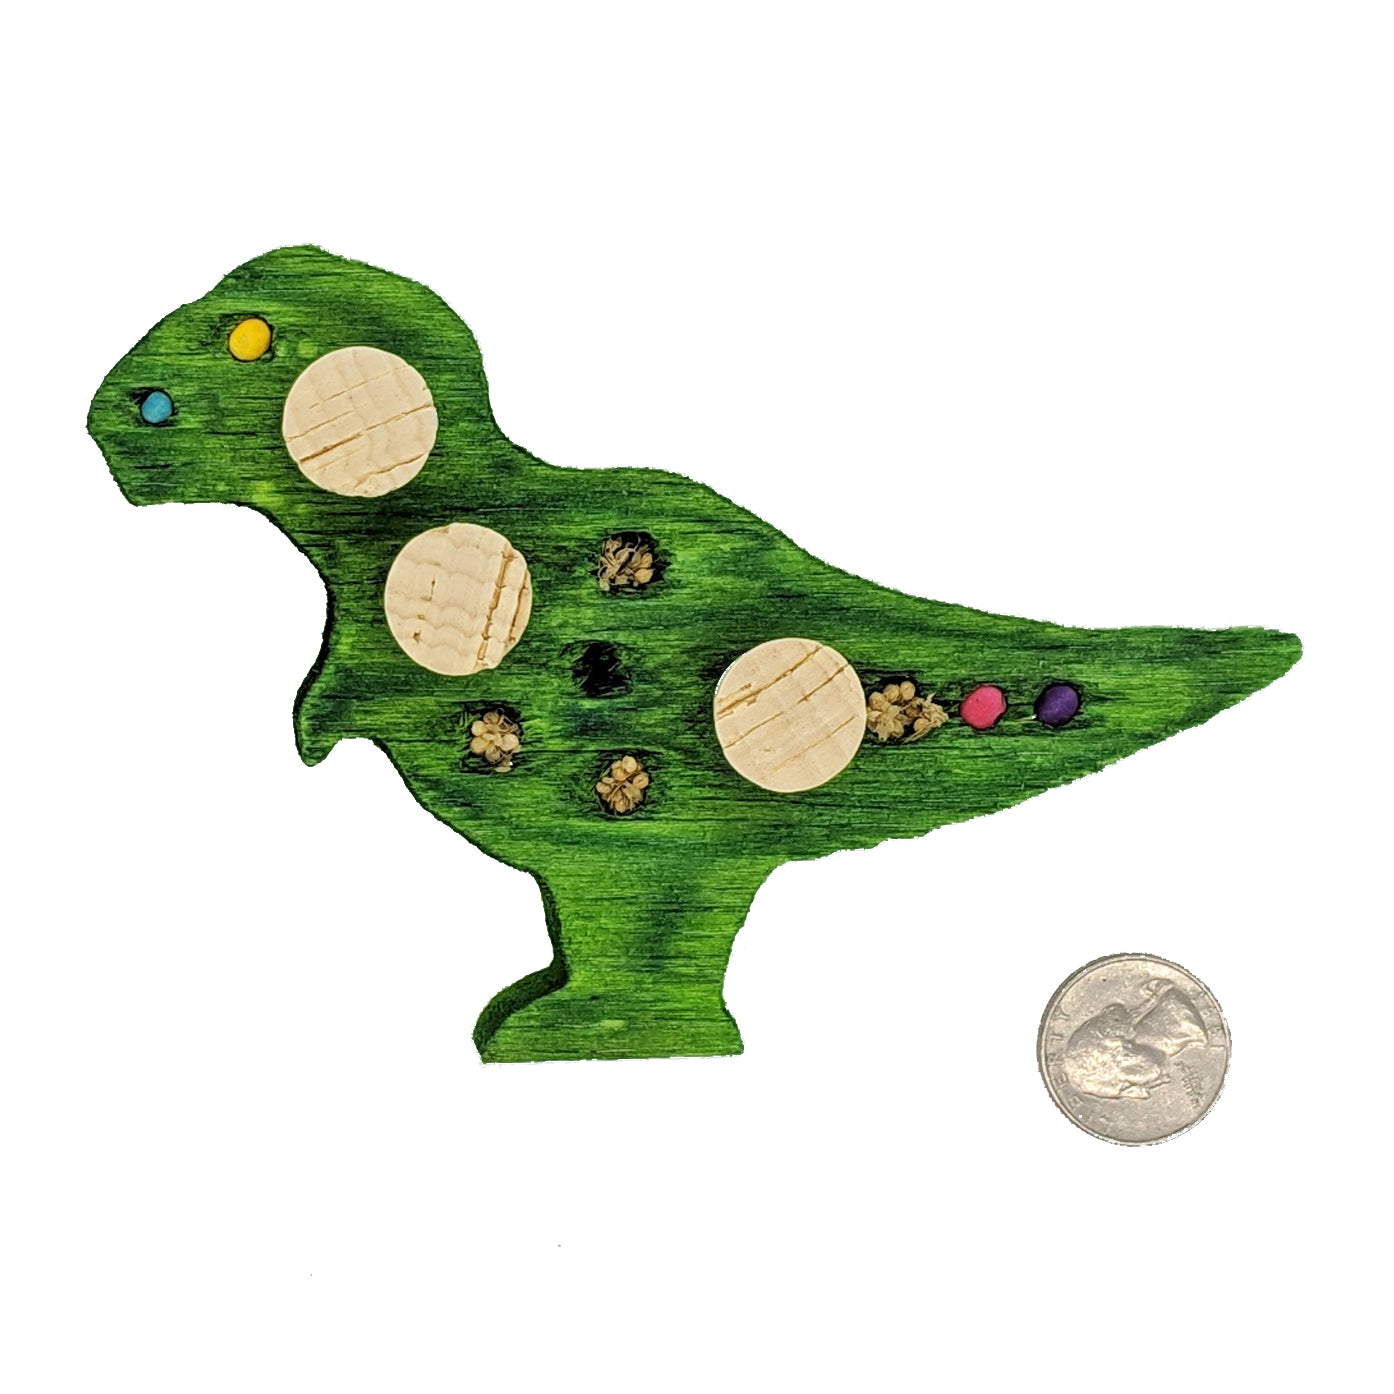 A tyrannosaurus rex shaped piece of balsa, with 4 small beads, 4 spots for millet or beads, and 3 cork stoppers. Shown with US quarter for scale. 